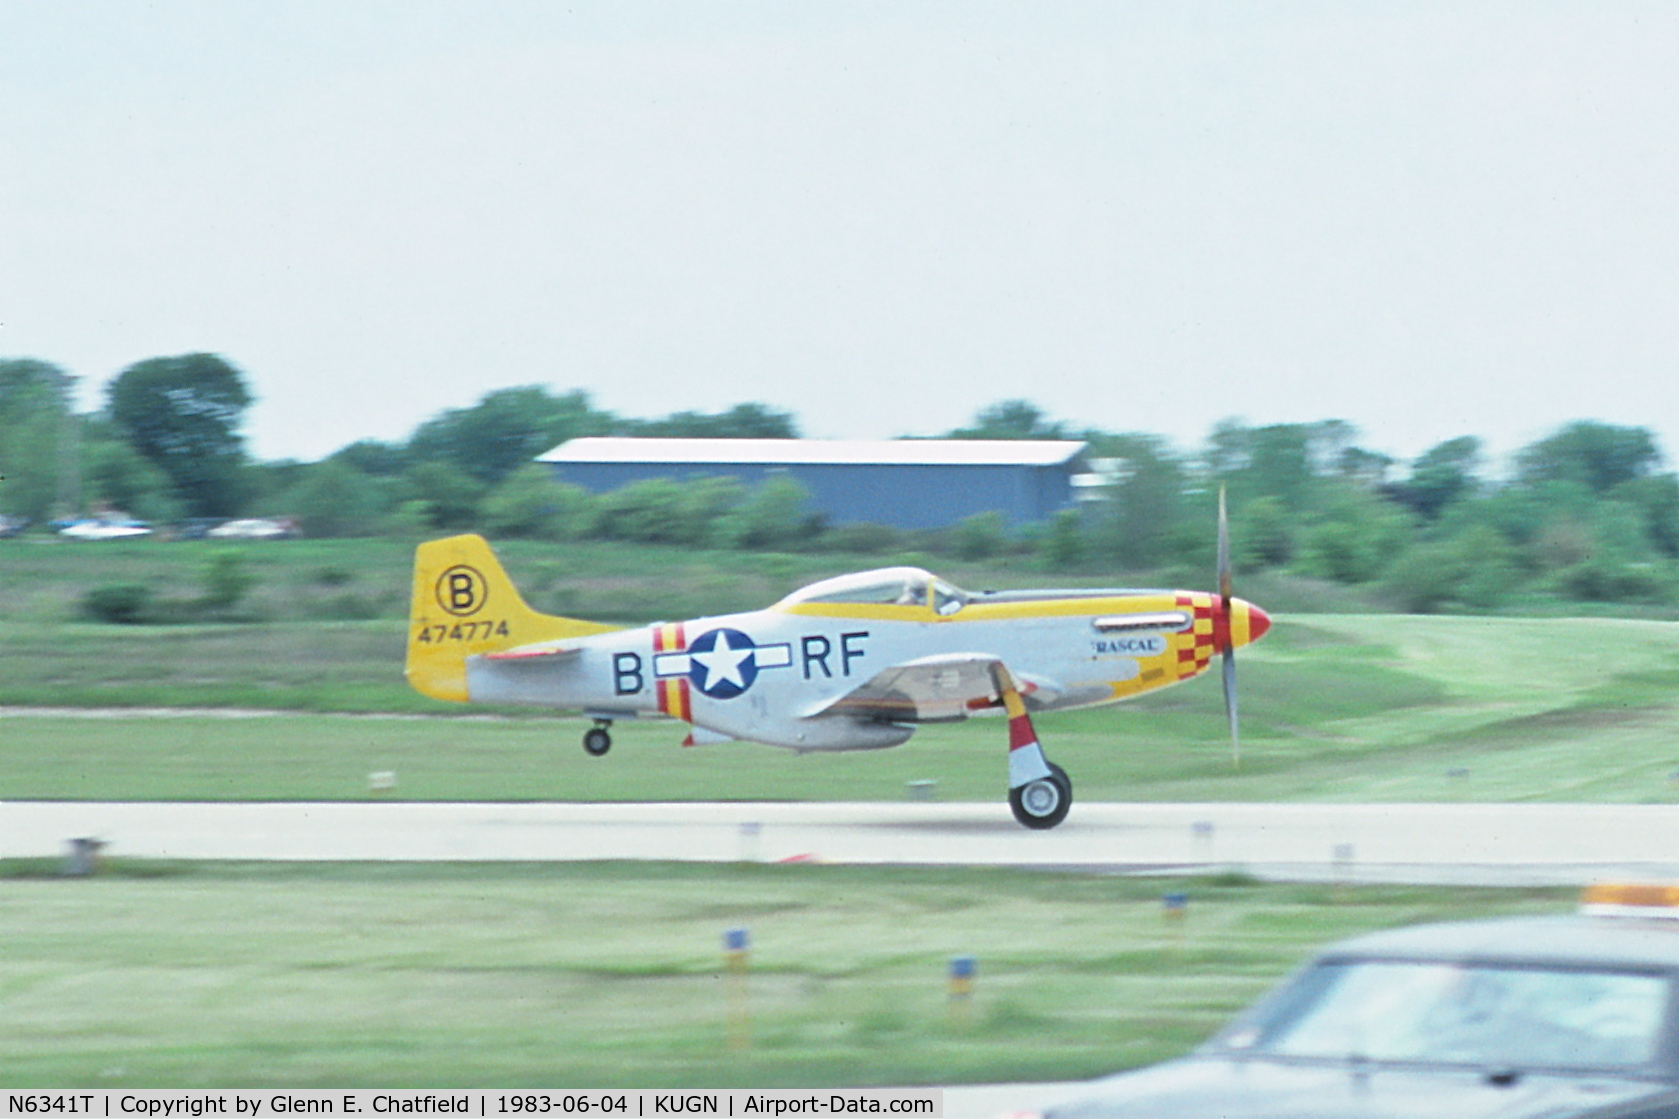 N6341T, 1944 North American P-51D Mustang C/N 44-74774, On departure for the show